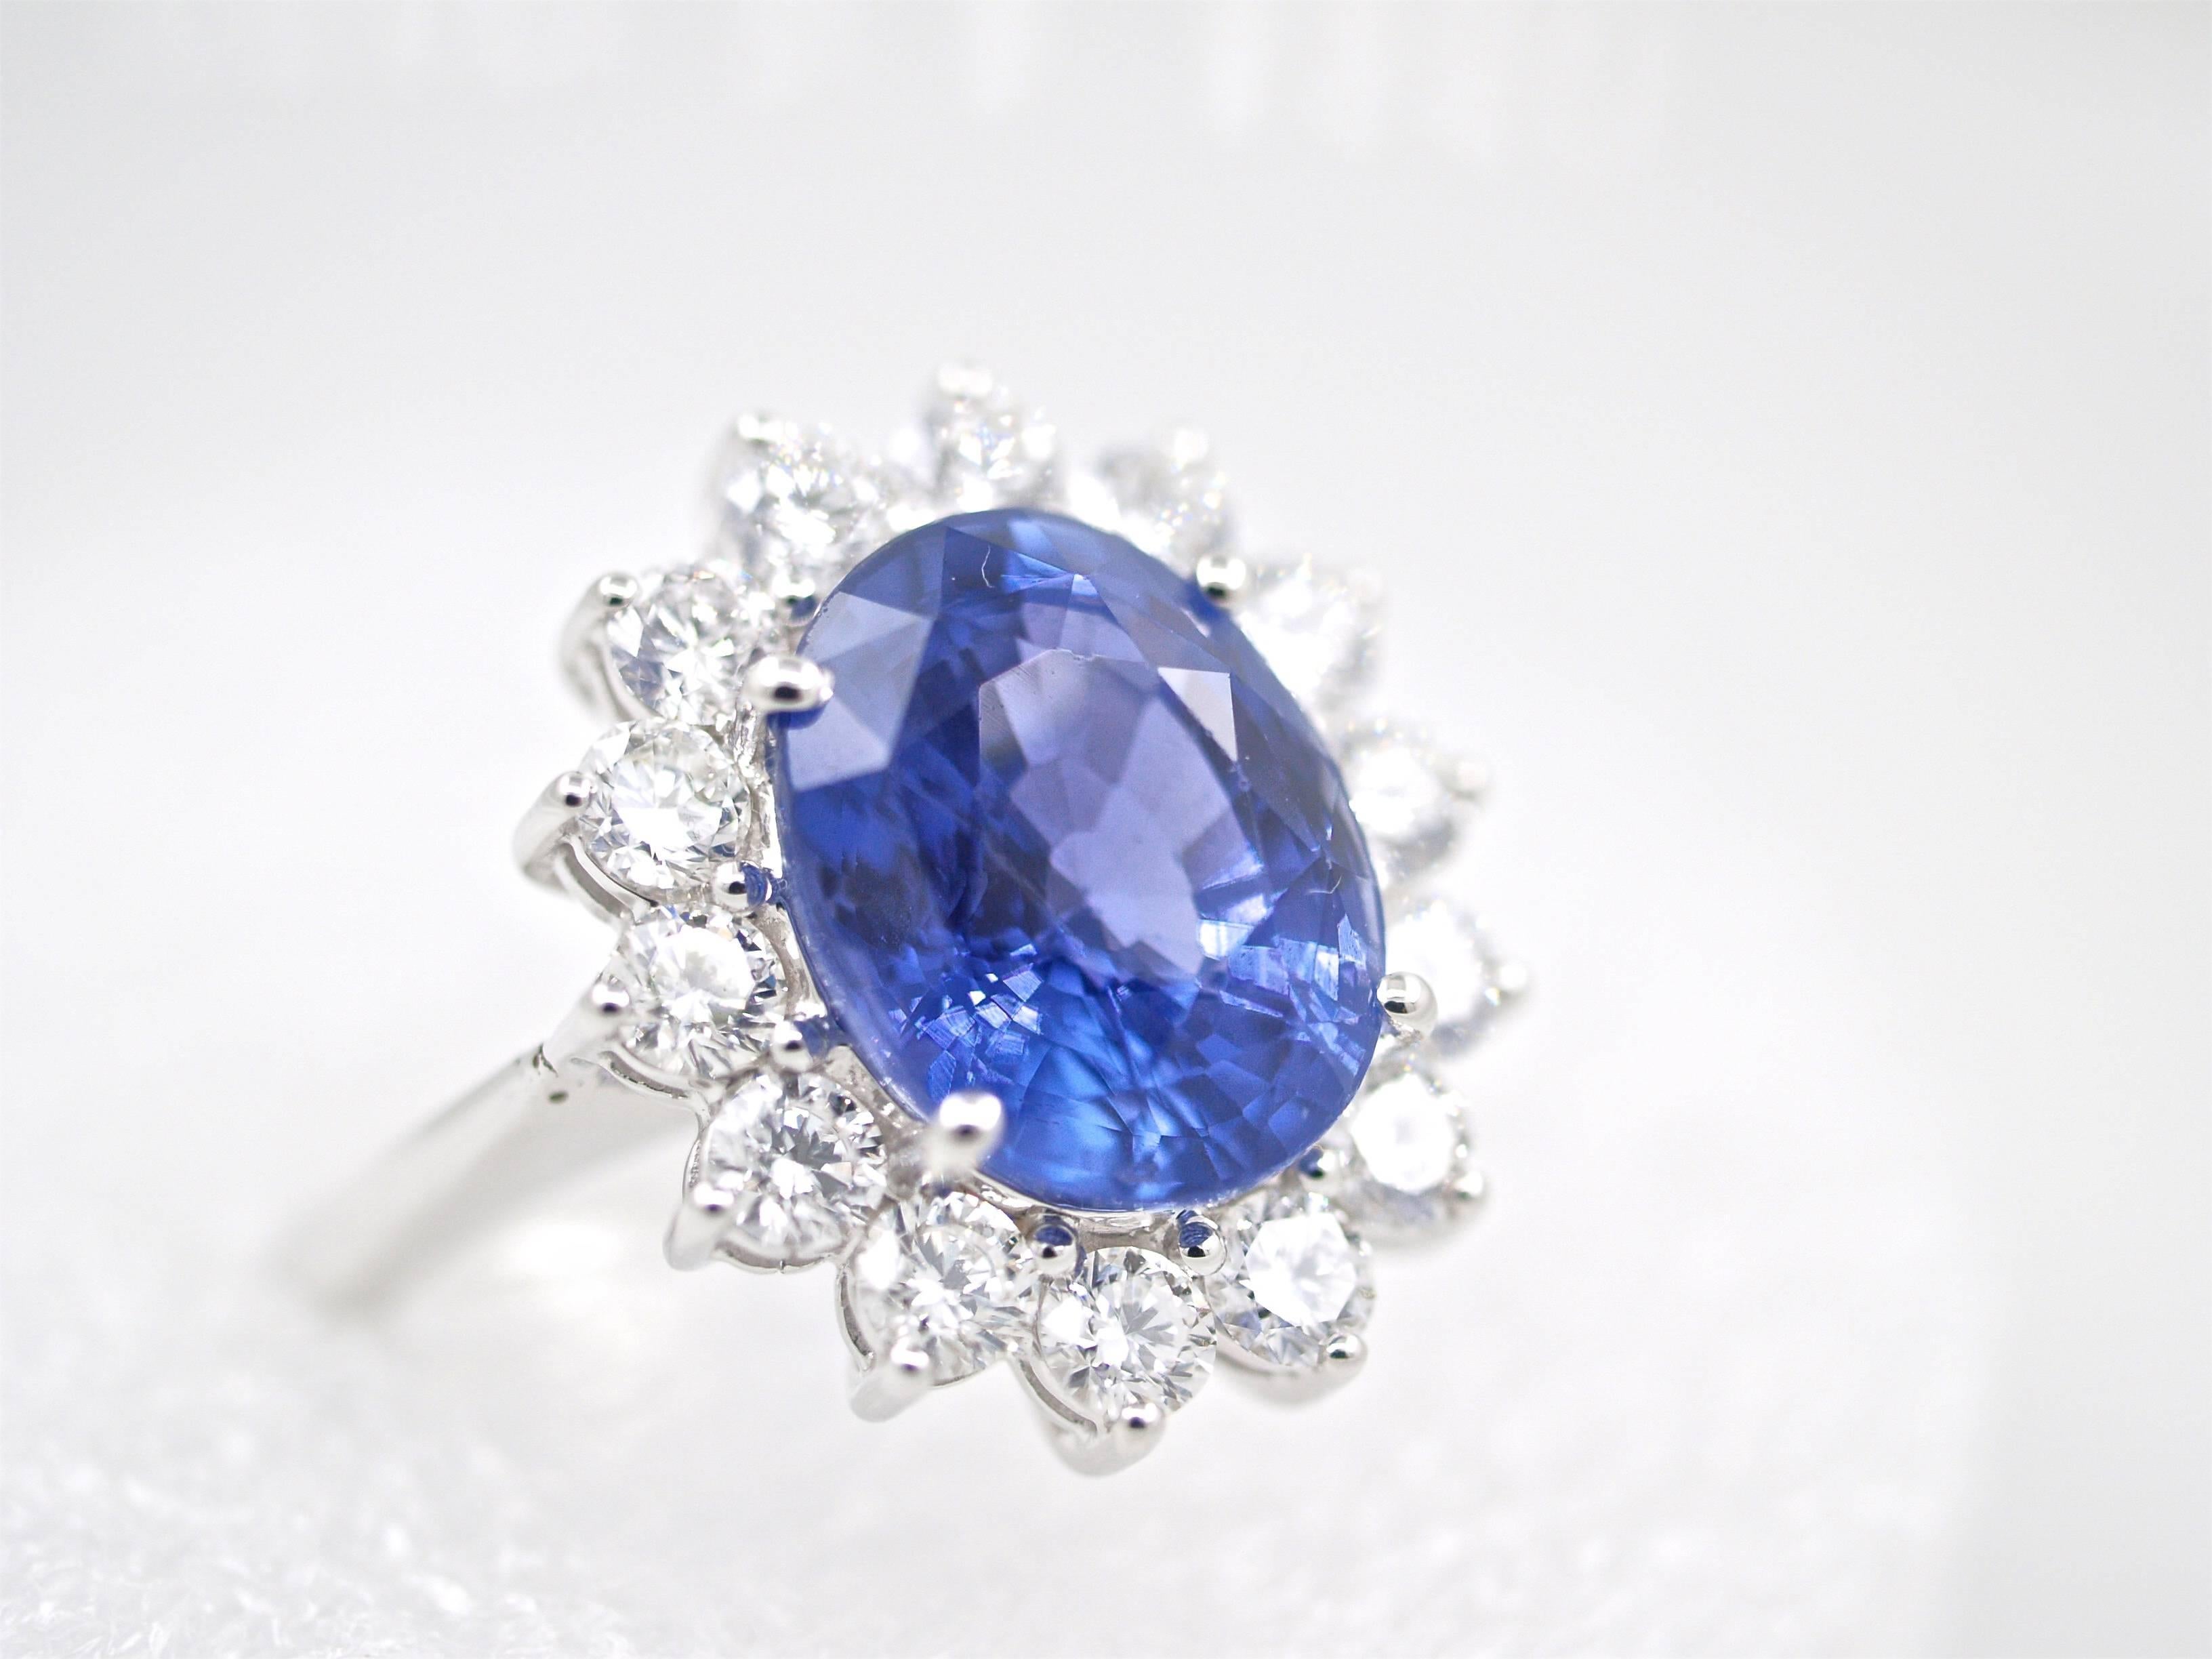              +++++++All realistic offers are welcome.+++++++

This sparkling Sapphire diamond ring is crafted in solid 18KT gold . It exposes at the center a natural corundum Unheated sapphire of violetish blue color with high transparency,